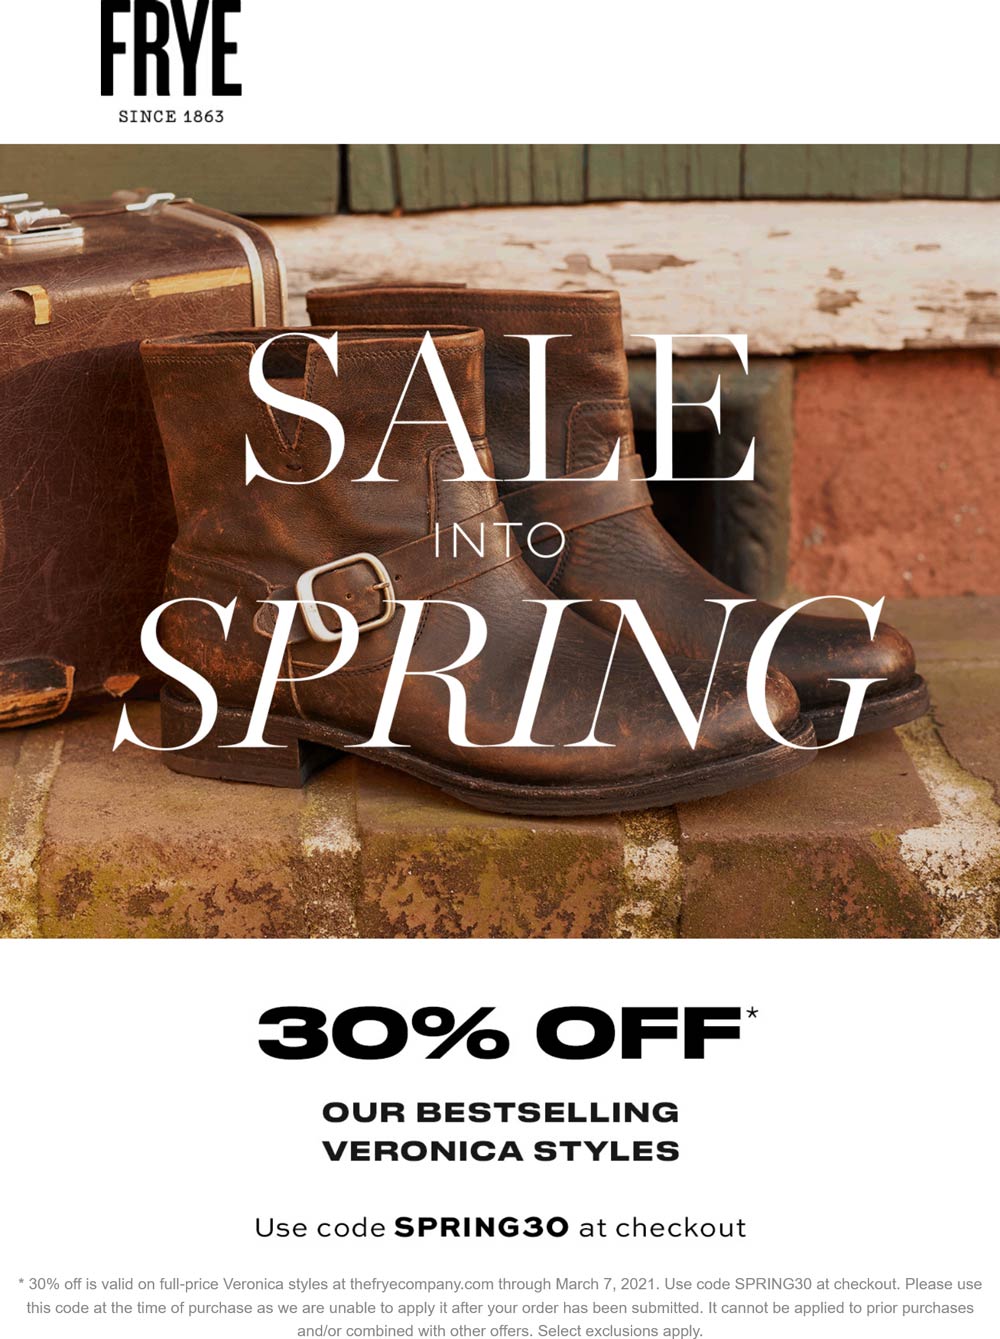 Frye stores Coupon  30% off Veronica styles today at The Frye Company via promo code SPRING30 #frye 